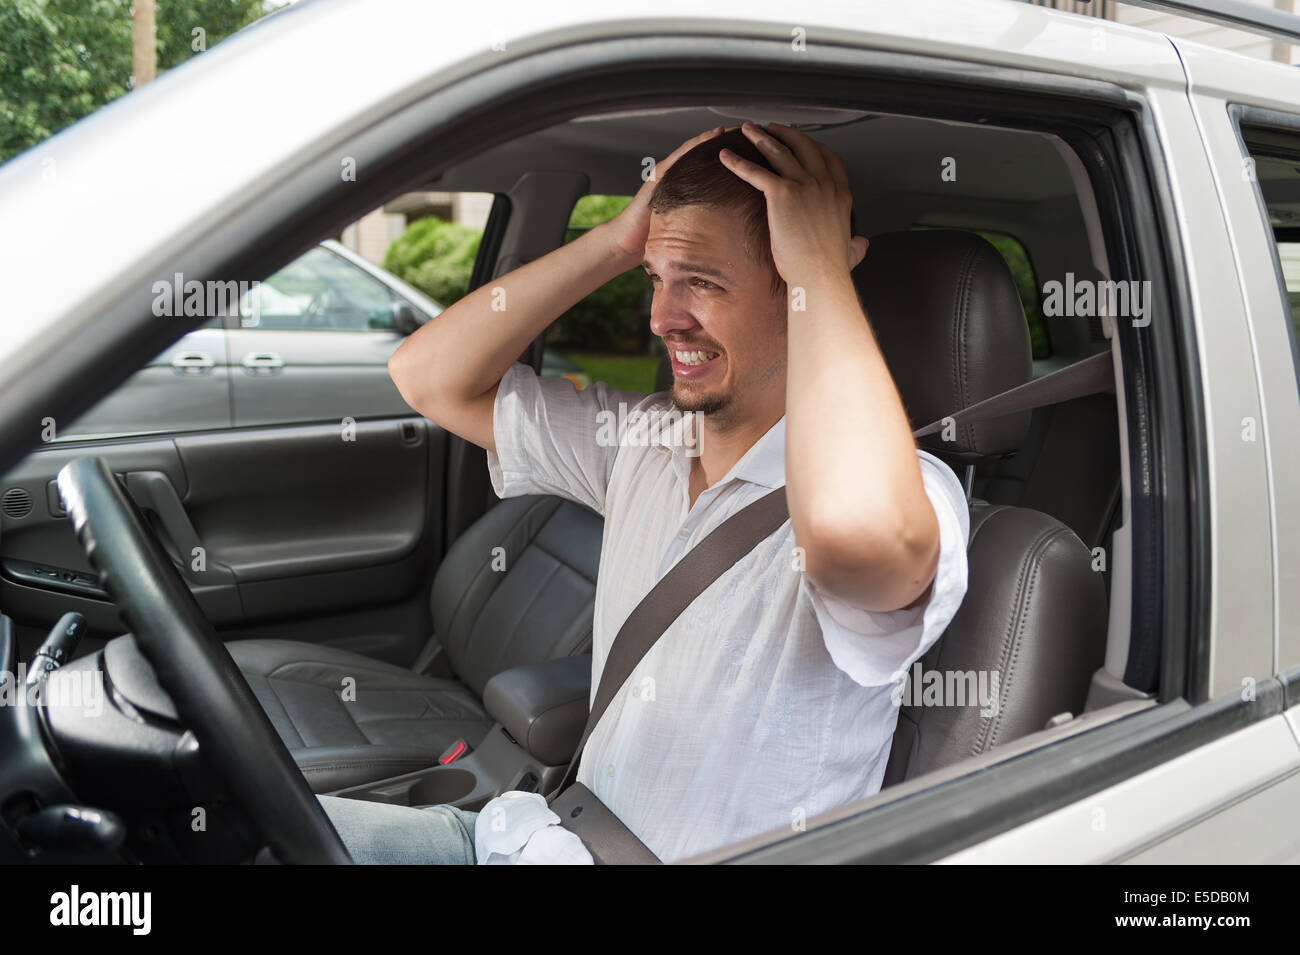 Young caucasian driver did something wrong Stock Photo